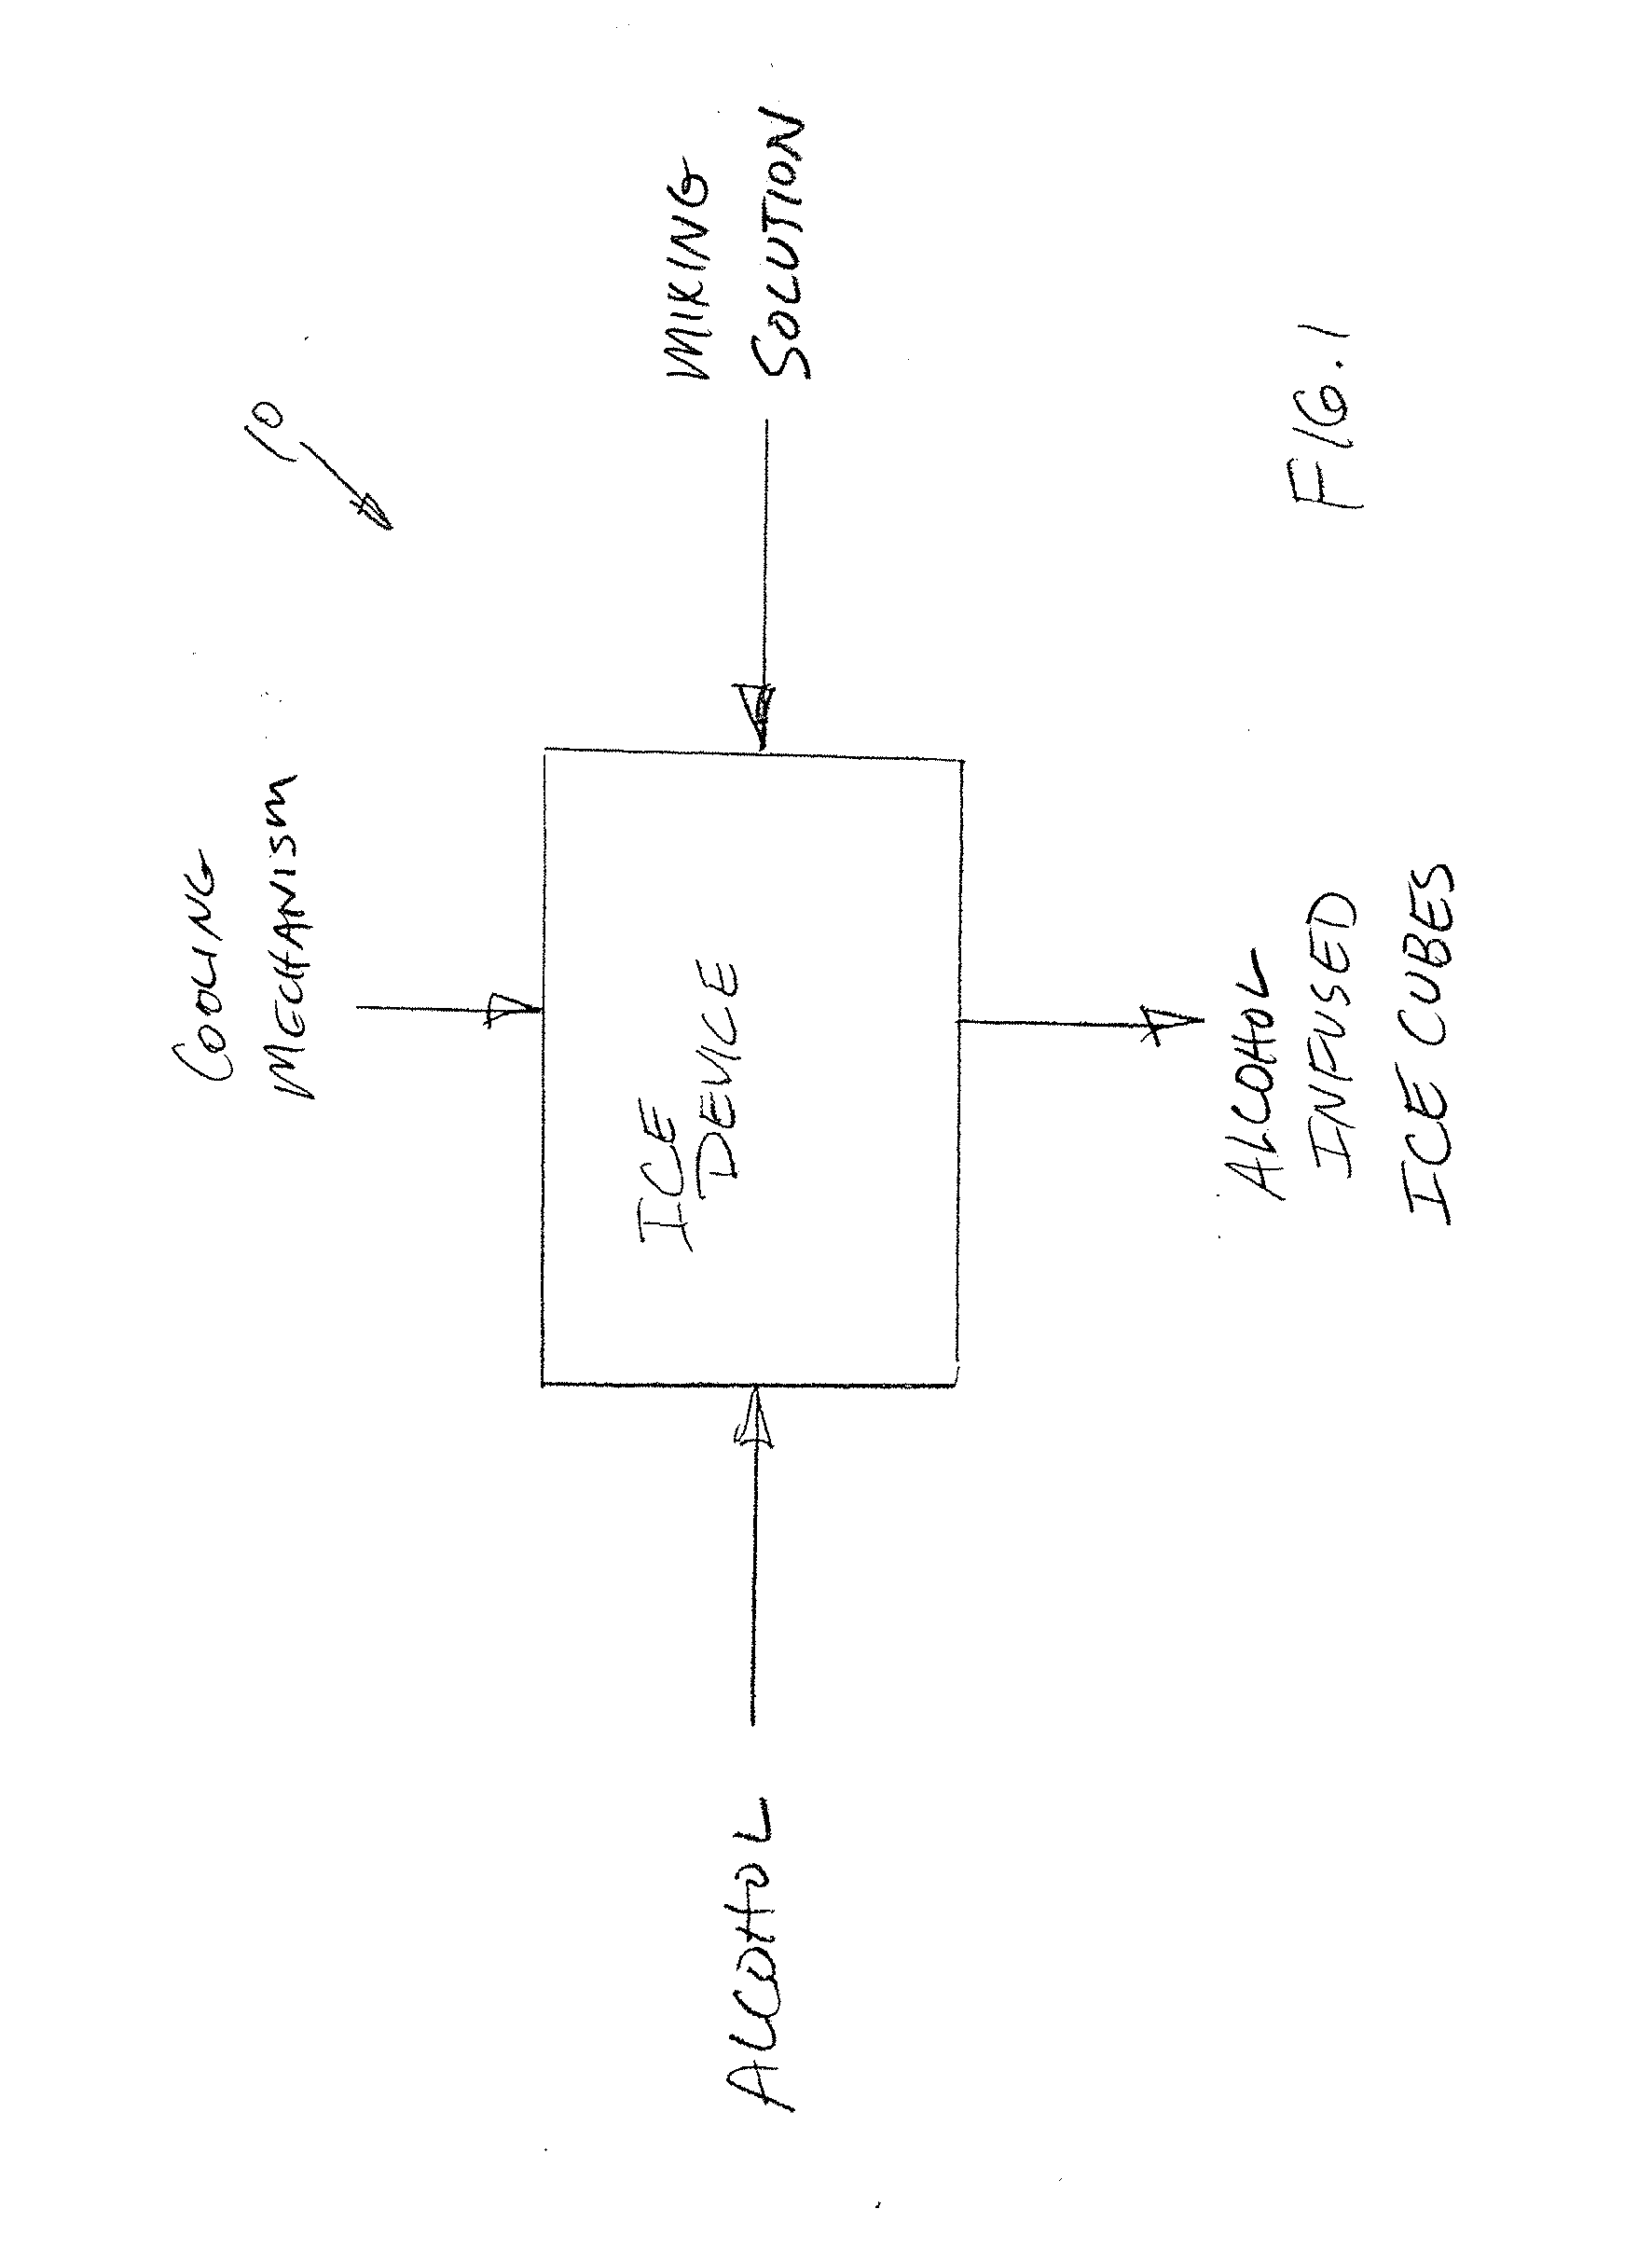 Alcohol infused ice cube apparatus and methods